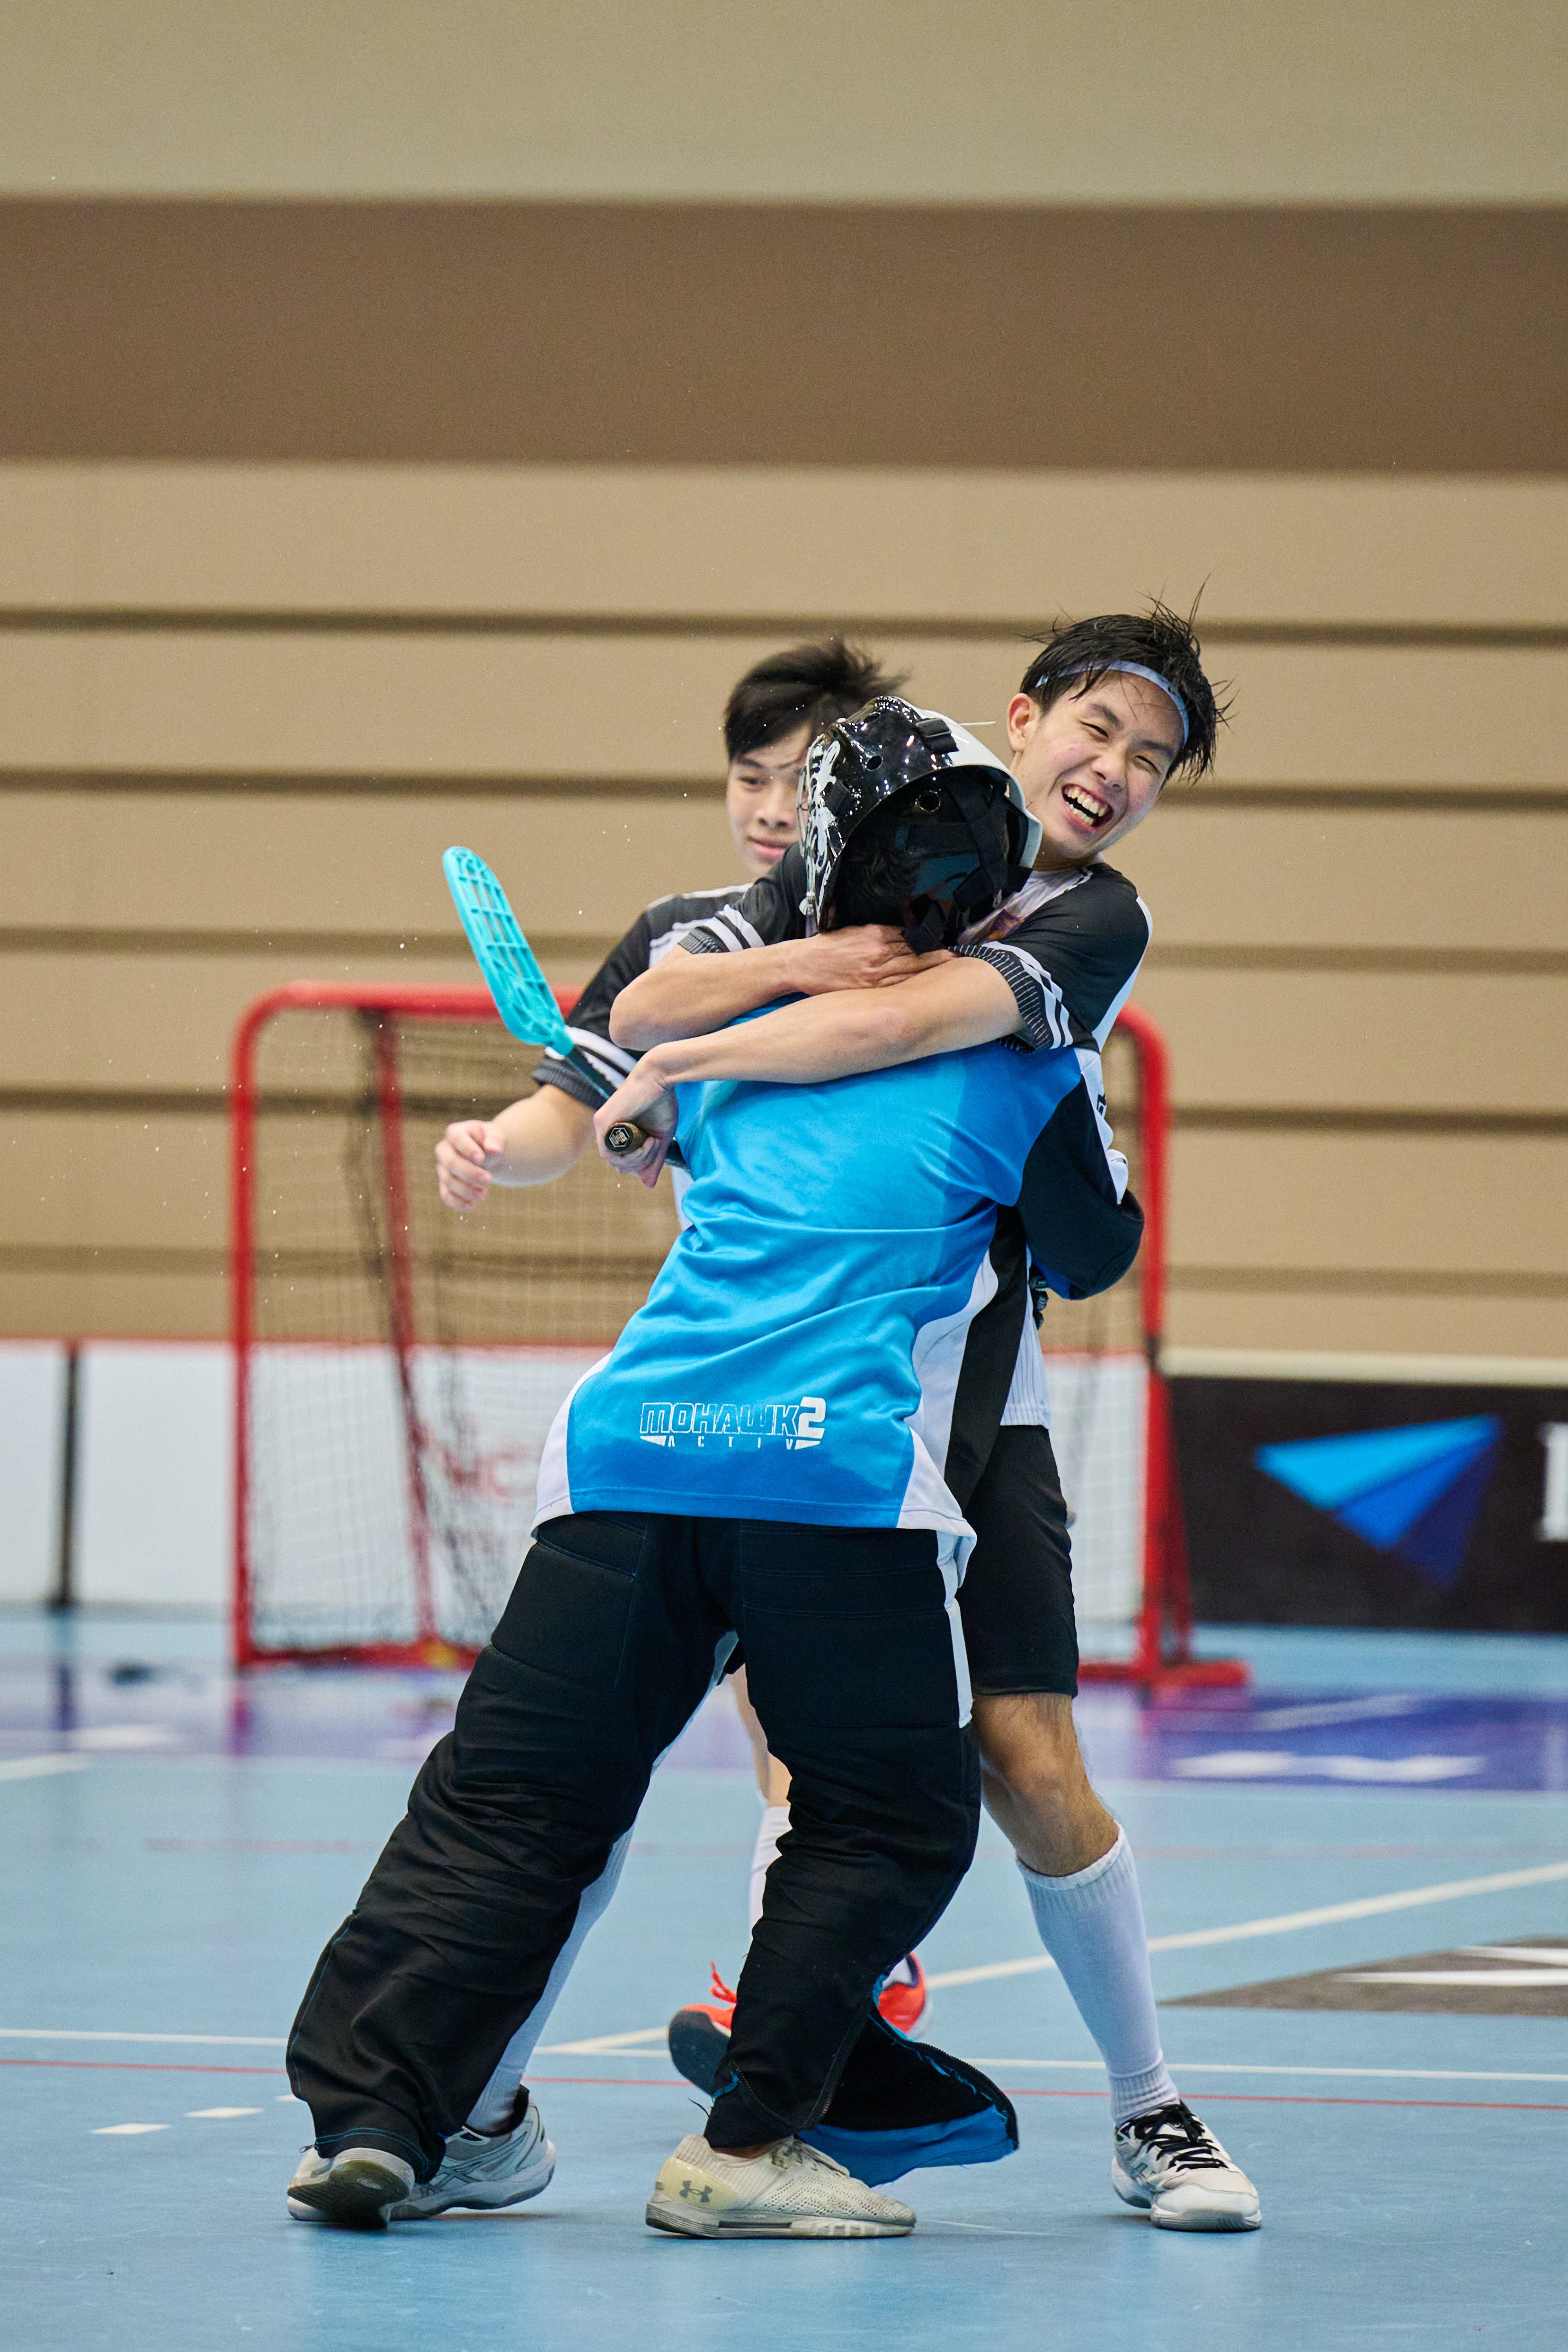 20220519_20220519 SSSC Floorball National A Div Boys Semi Finals Raffles Junior College Vs Anglo-Chinese Junior College_Siaw Woon Chong_0052